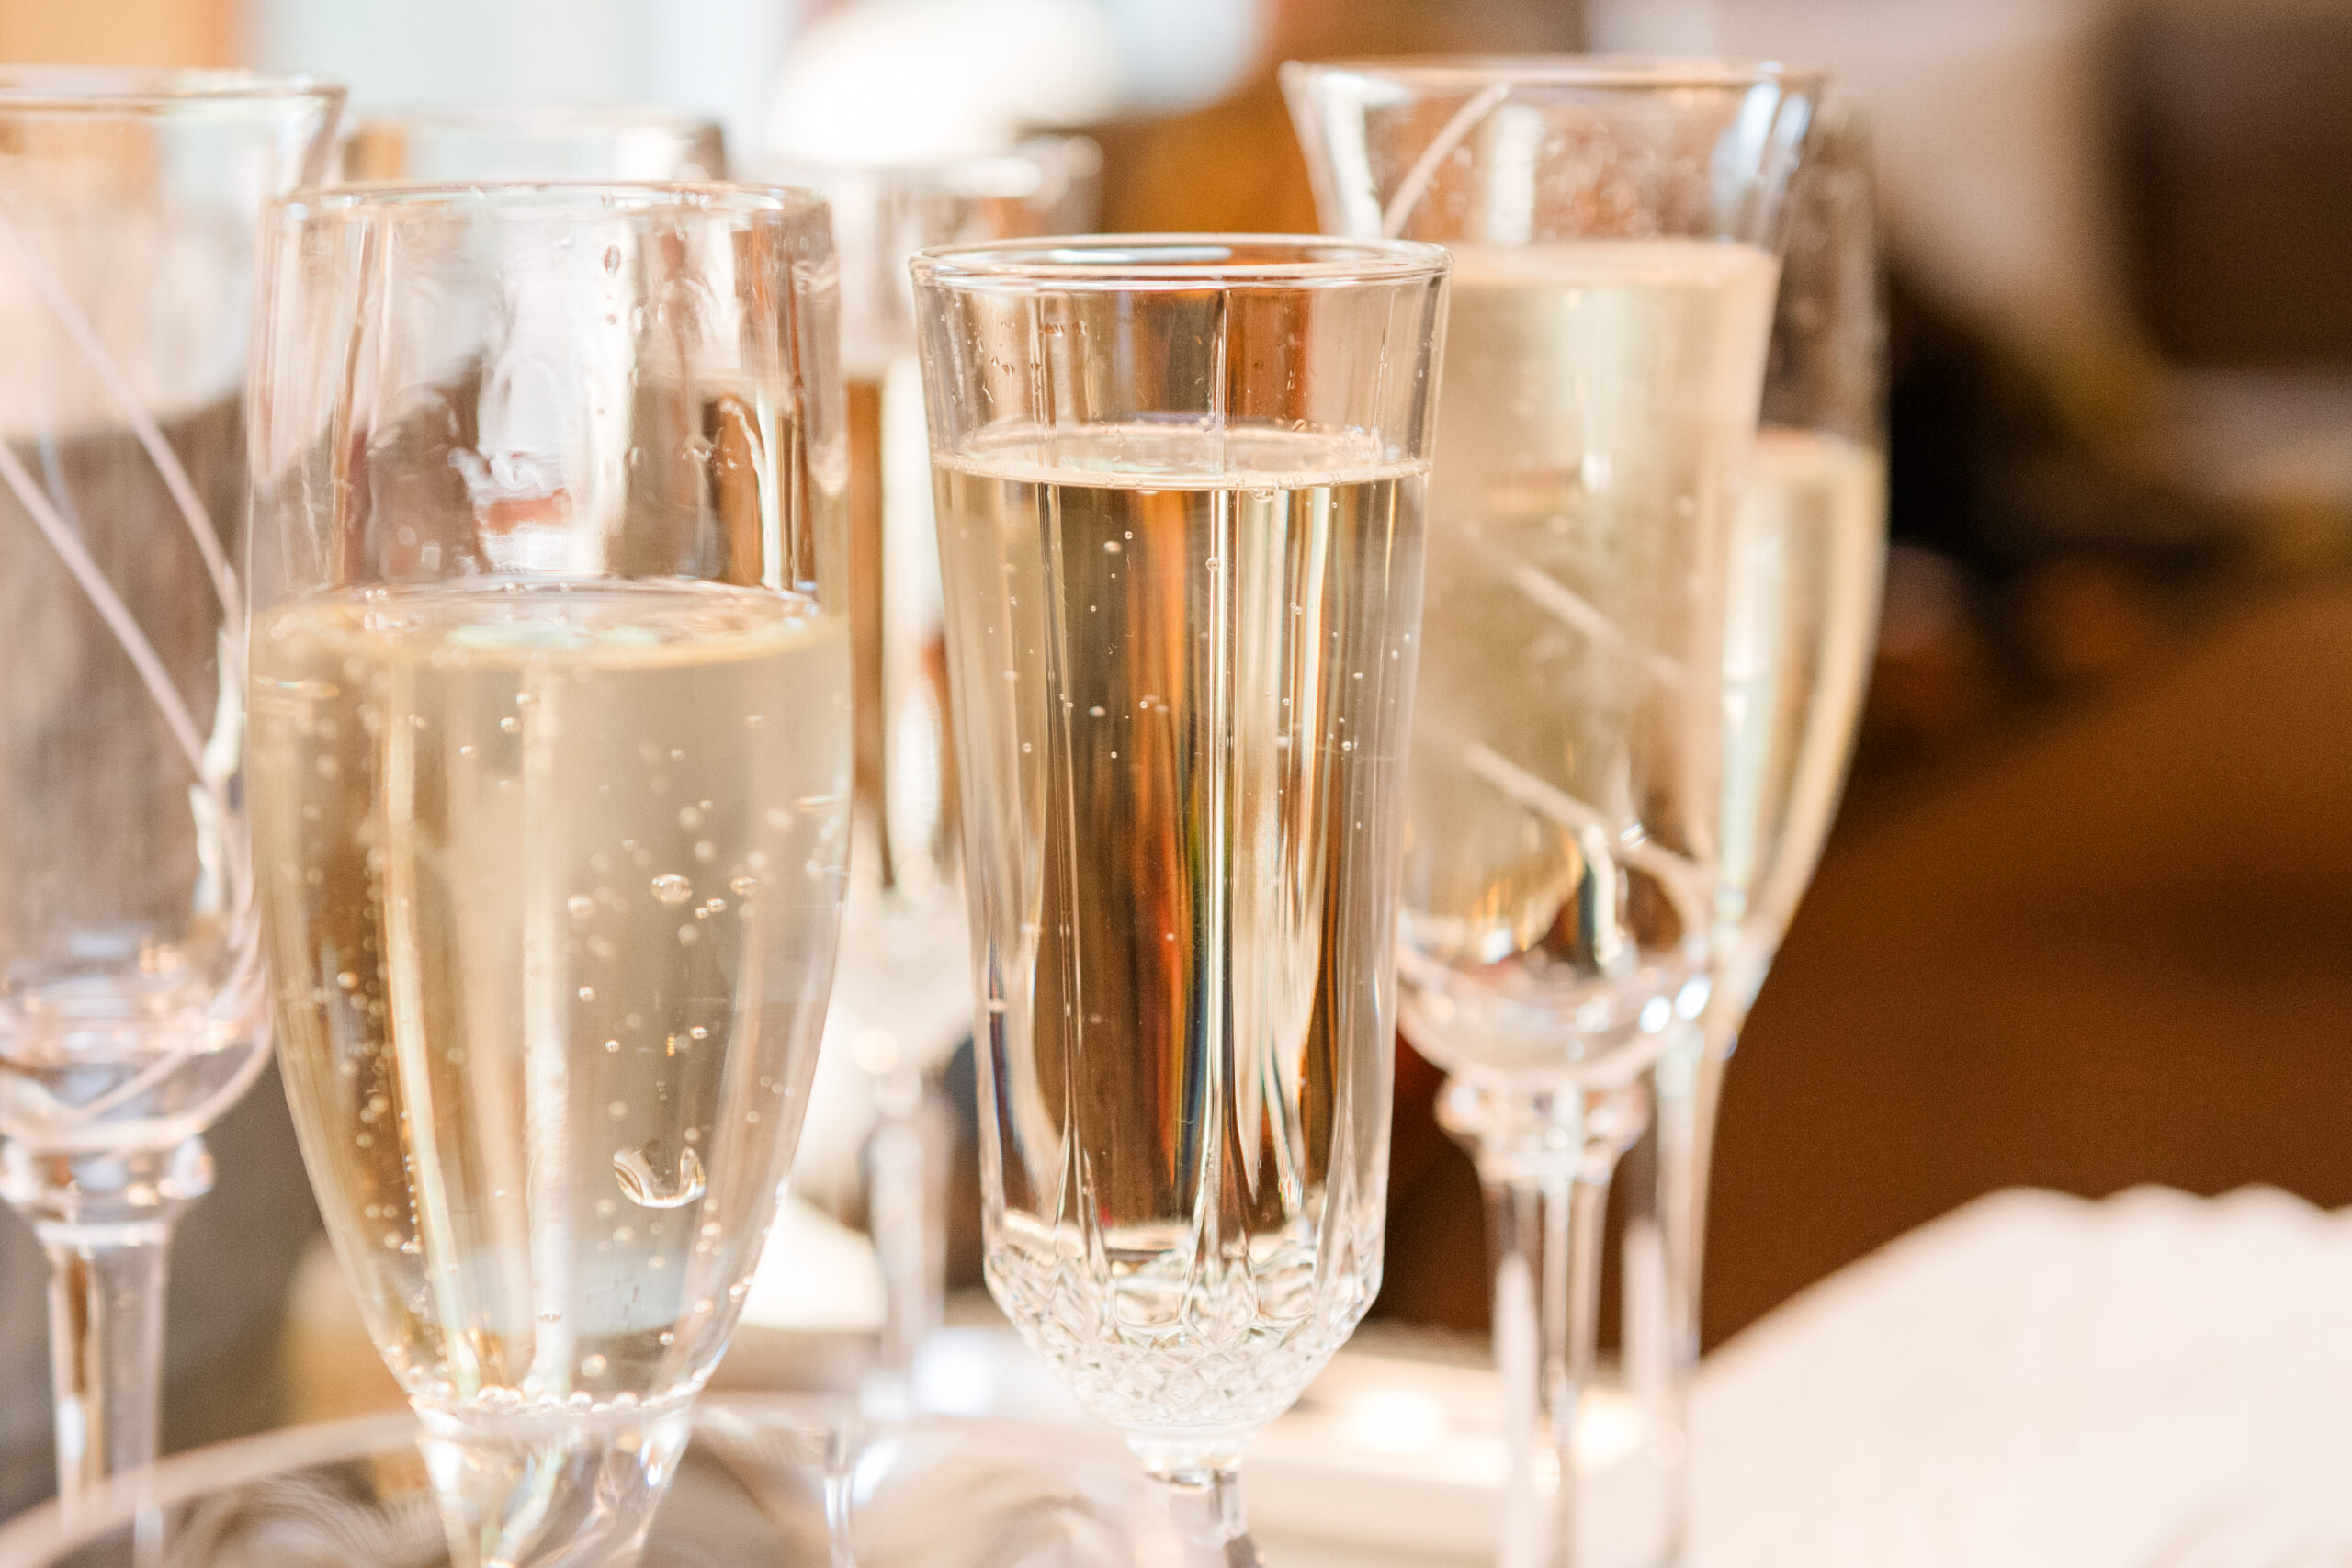 Several champagne glasses filled with bubbling champagne, ready for Dr. Emma's bridal shower